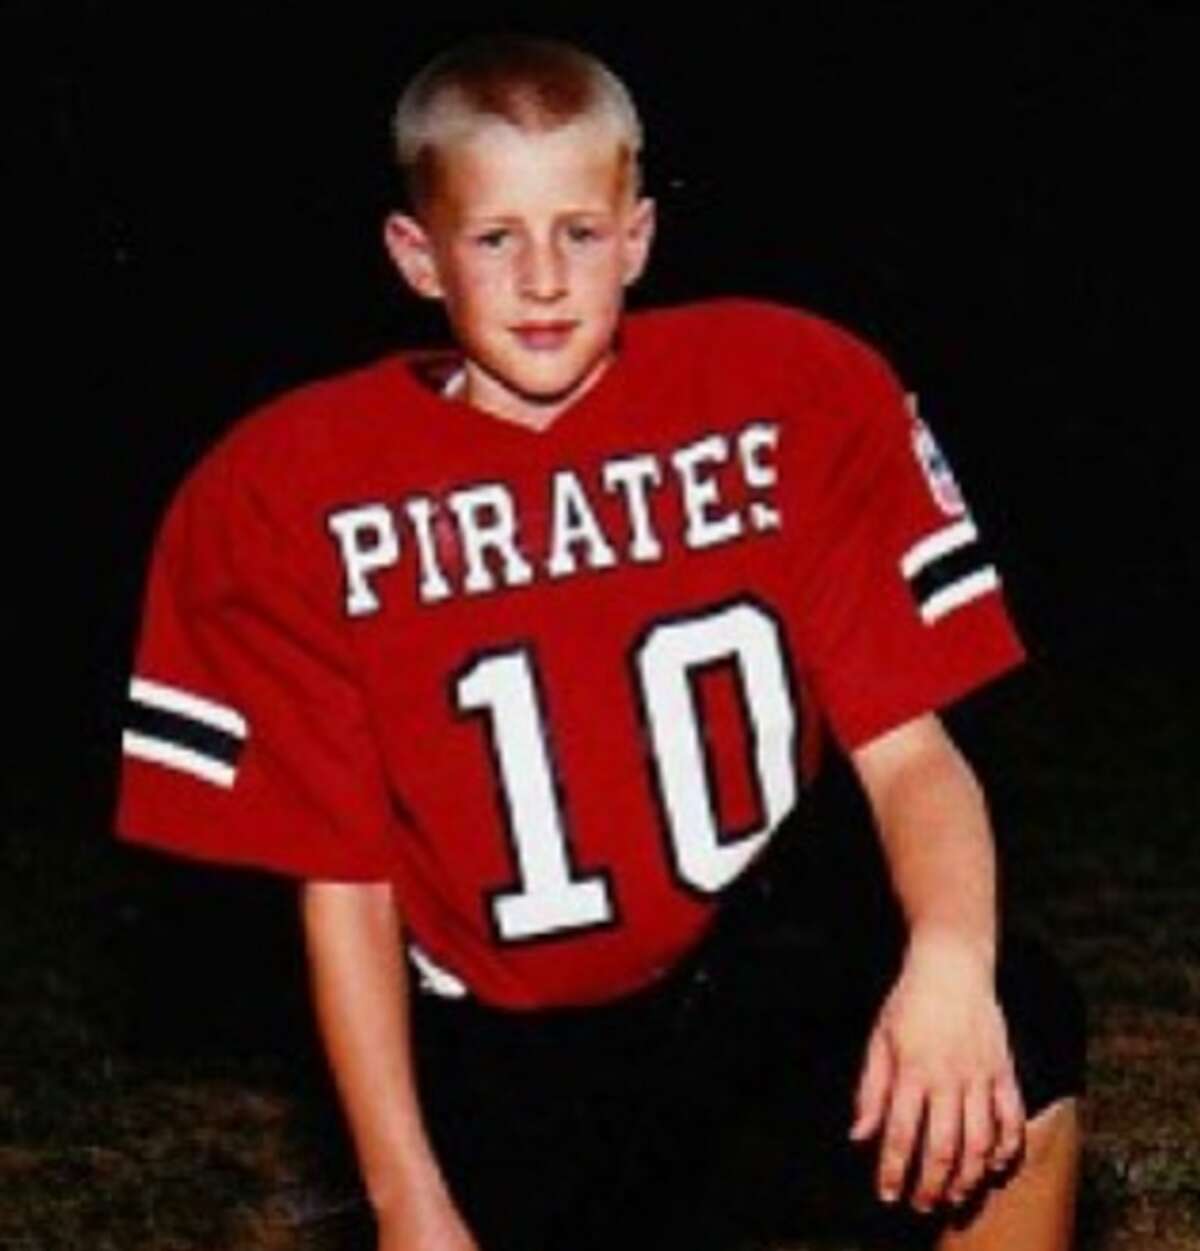 This youth quarterback grew up to become the face of the franchise ...